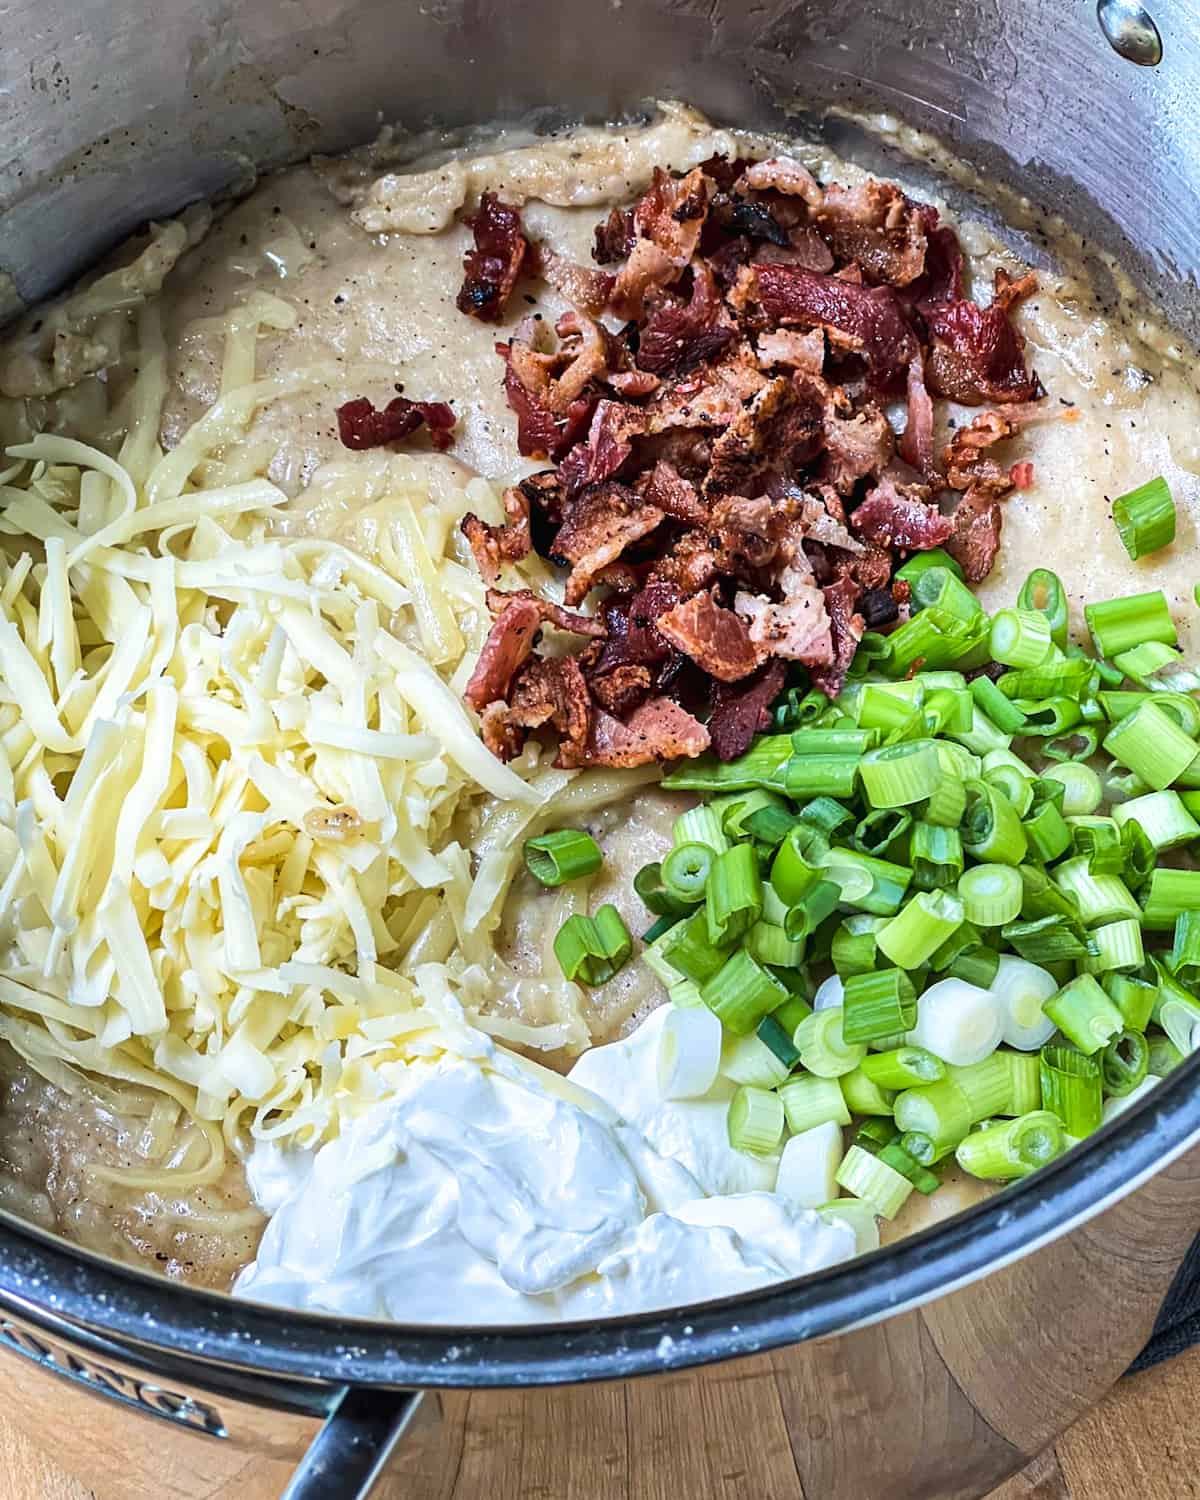 After adding the insides of the diced baked potato, add the crumbled bacon, cheddar cheese, scallions and sour cream into the pot of potato soup.